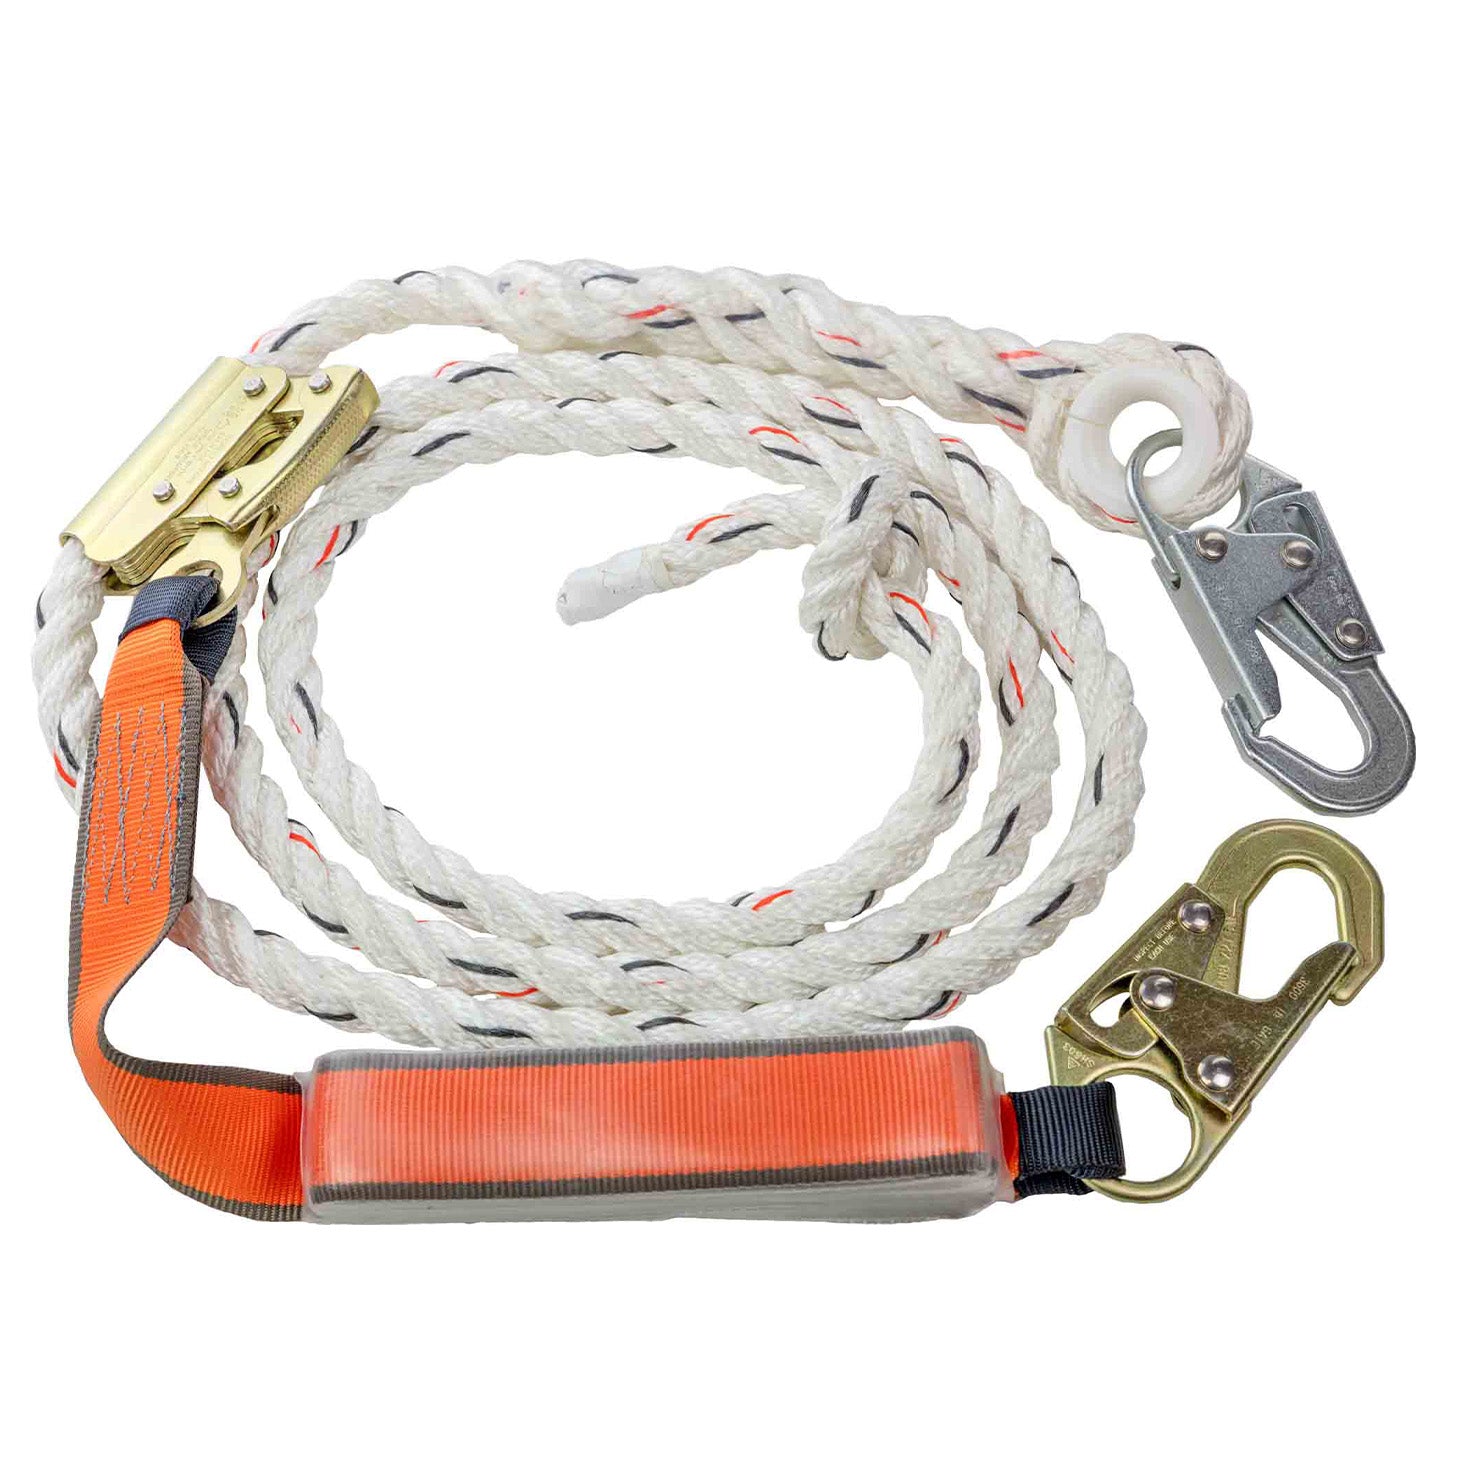 Malta C7051 Vertical Lifeline Assembly with 6' Lanyard & 25' Rope